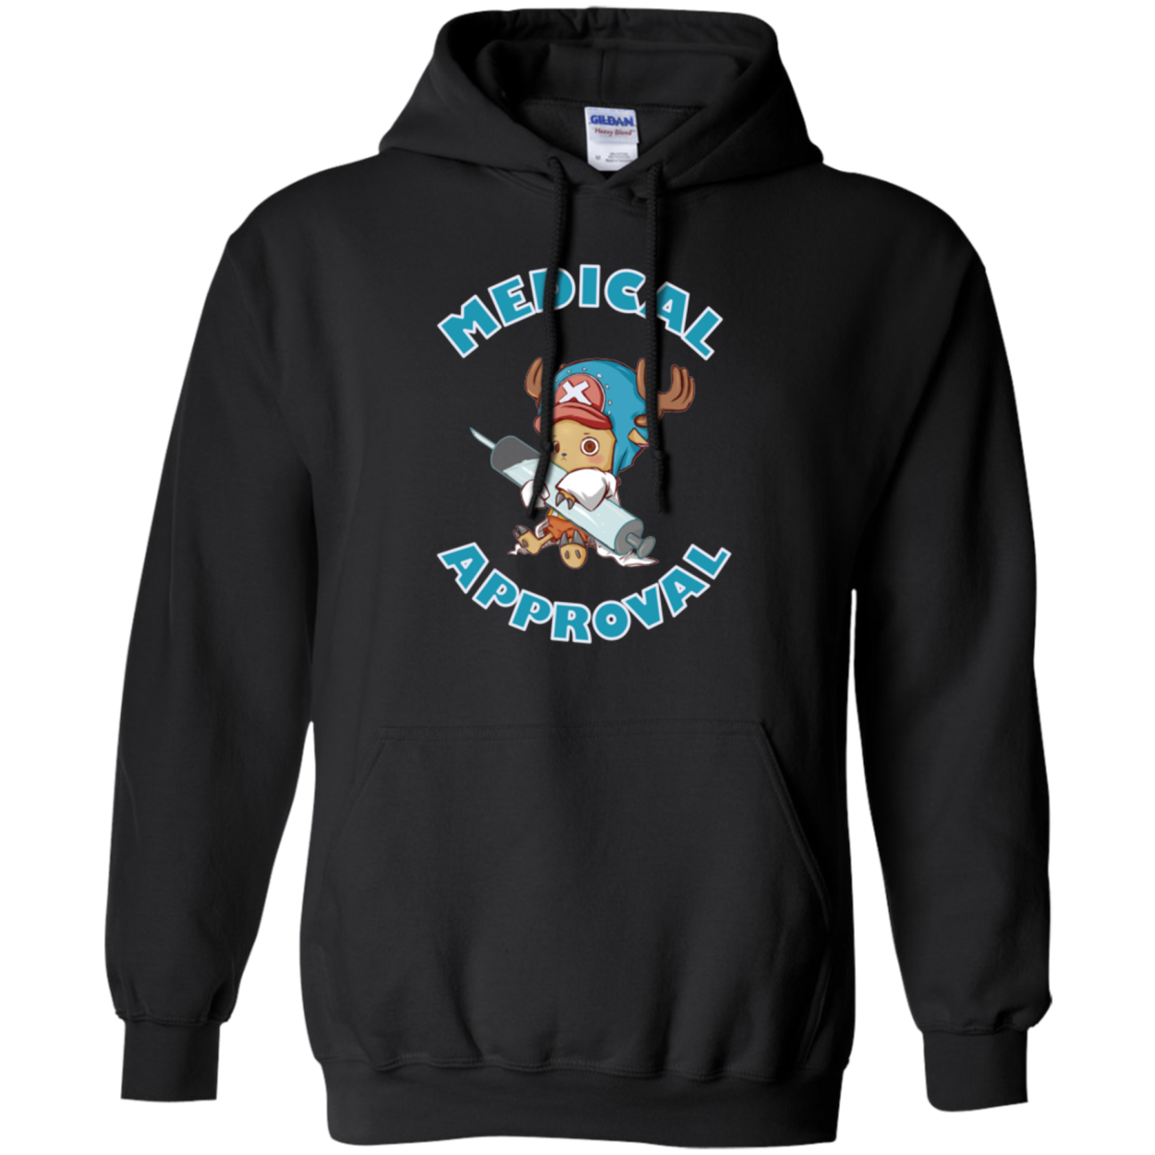 Medical approval Pullover Hoodie